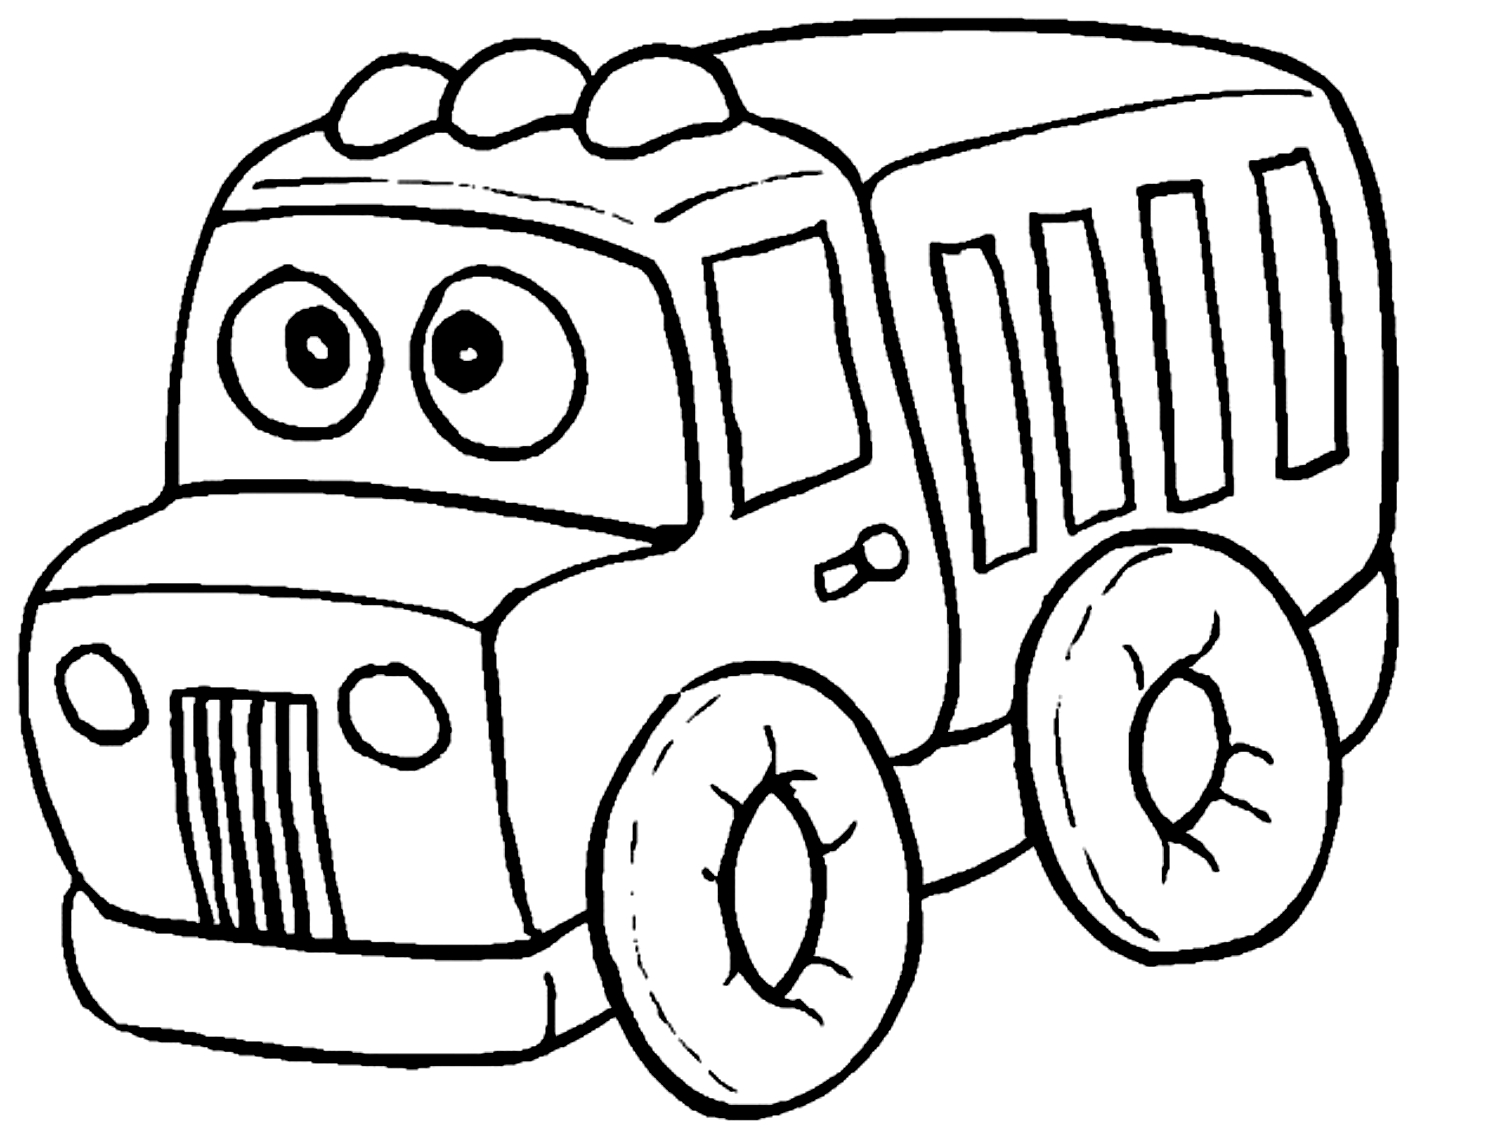 Drawing 5 from Truck coloring page to print and coloring